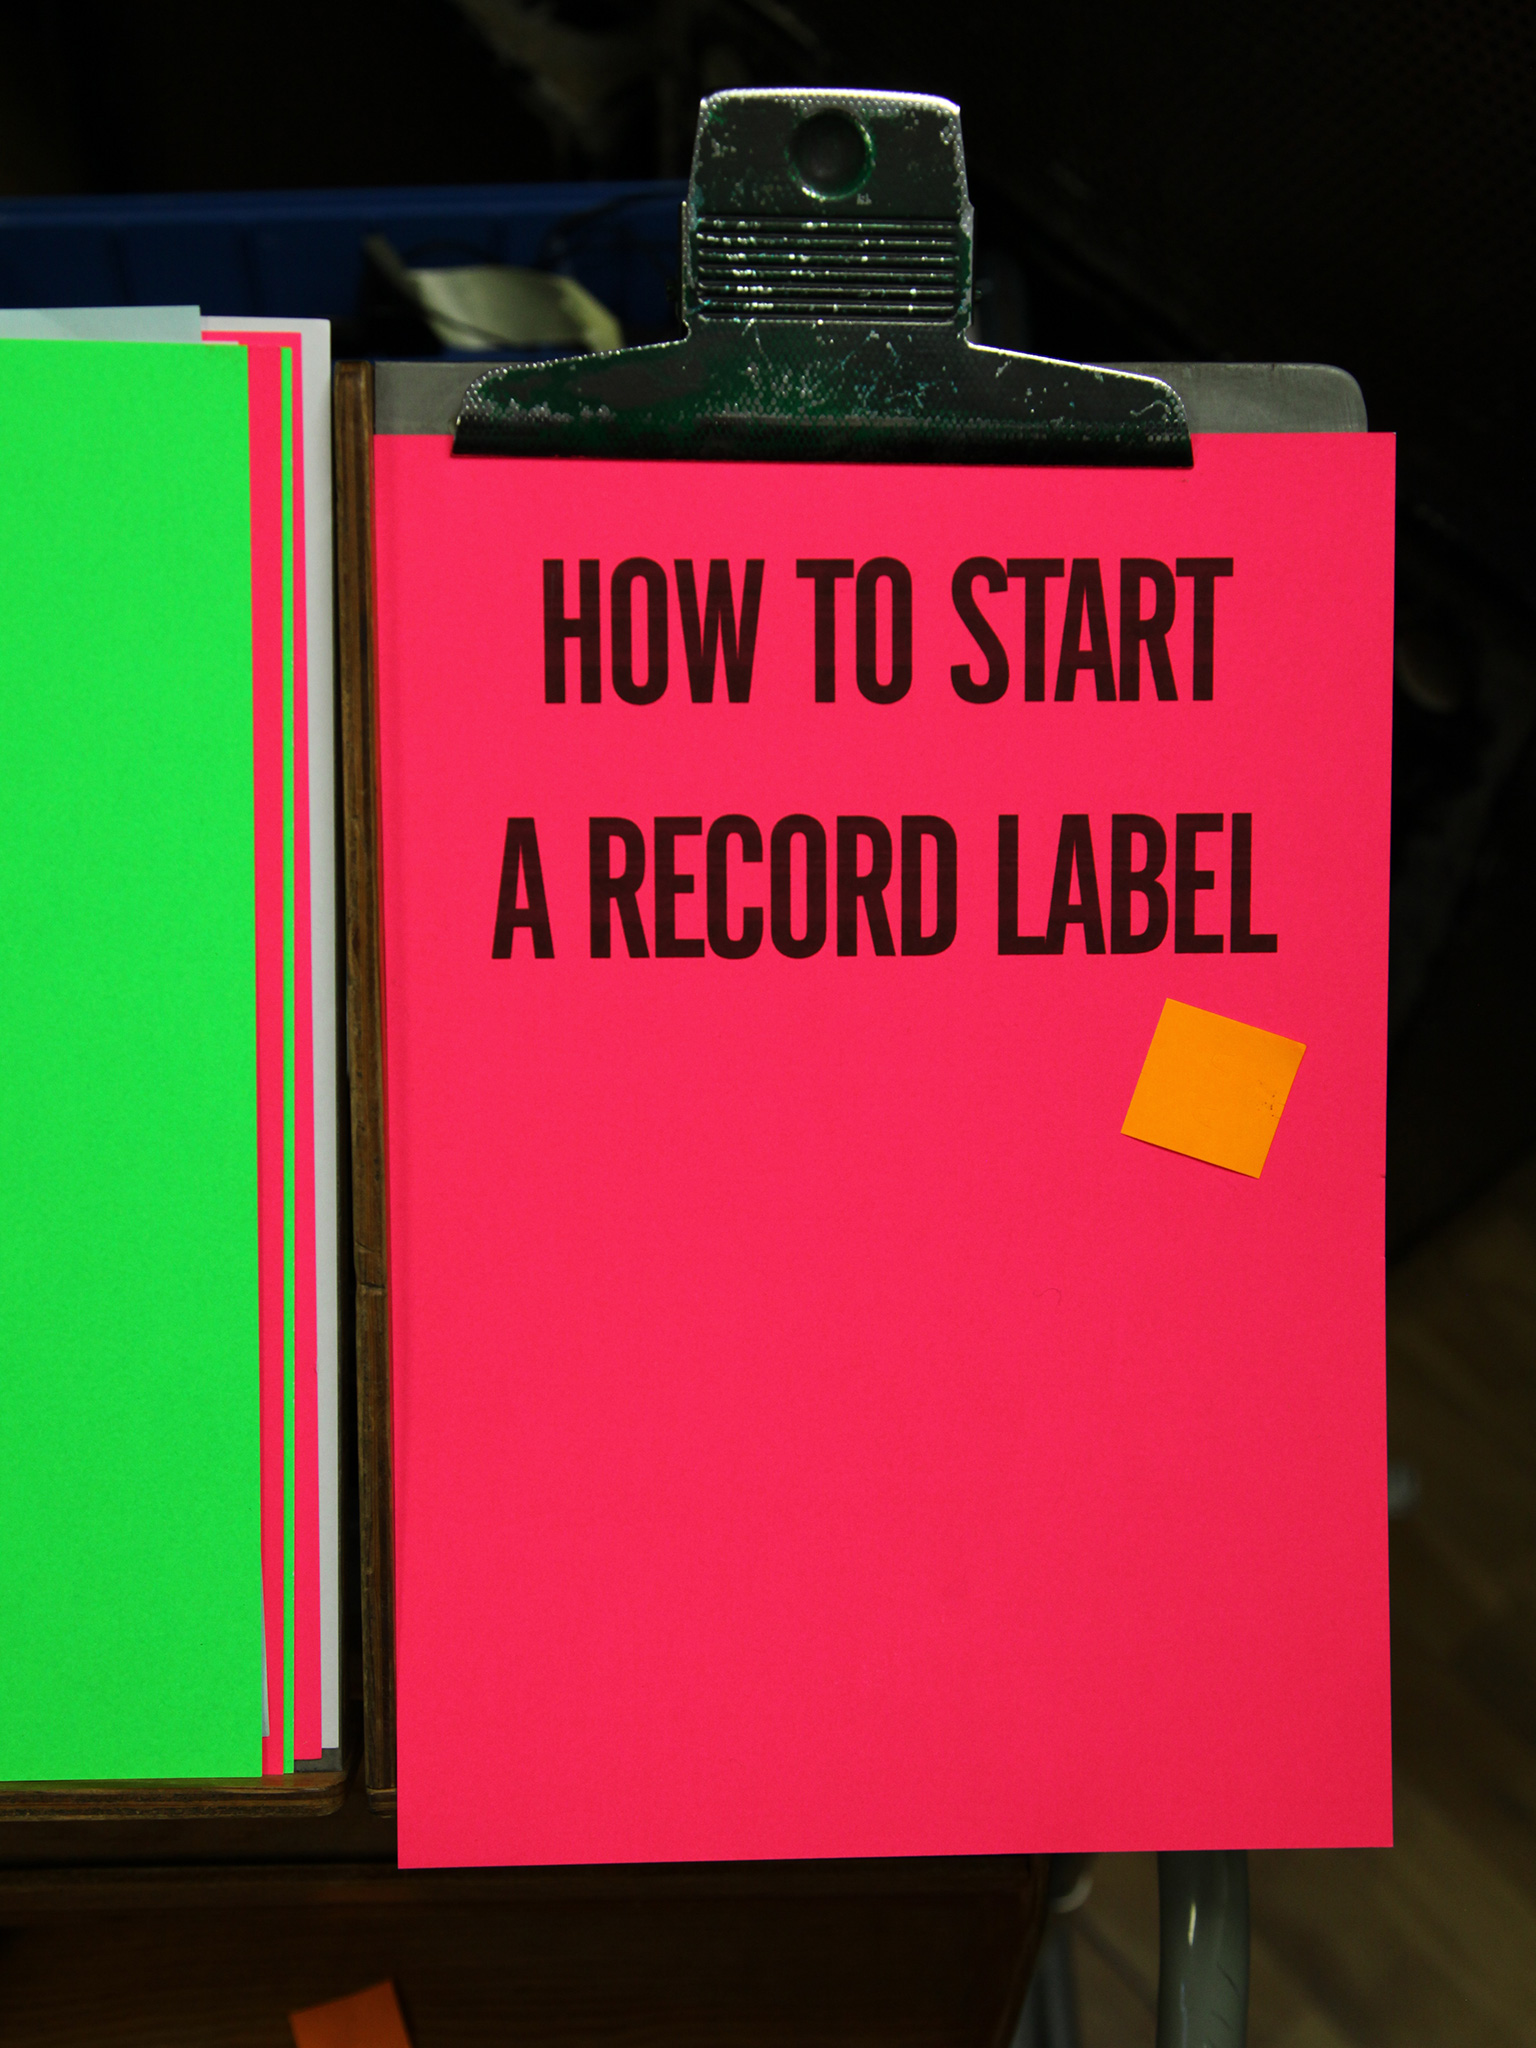 How to Start a Record Label